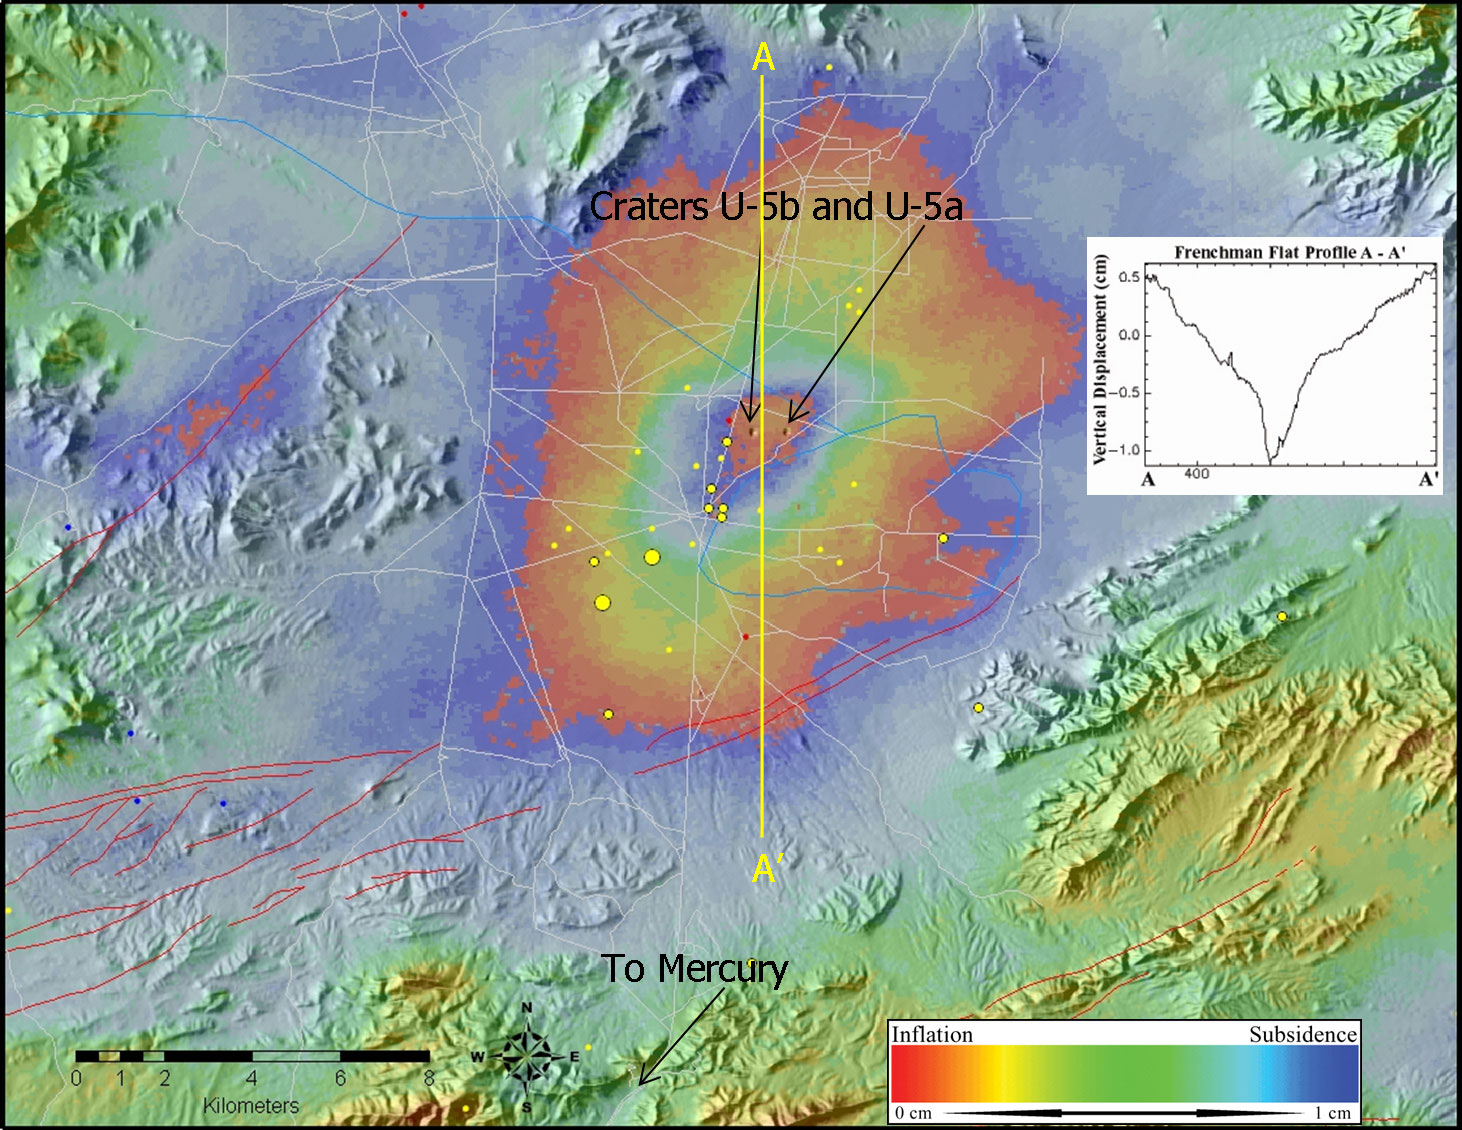 Unwrapped interferogram for period Feb 1998 to Feb 1999 showing deformation (subsidence) associated with the 1999 Frenchman Flat earthquake (M 4.8), Nevada Test Site